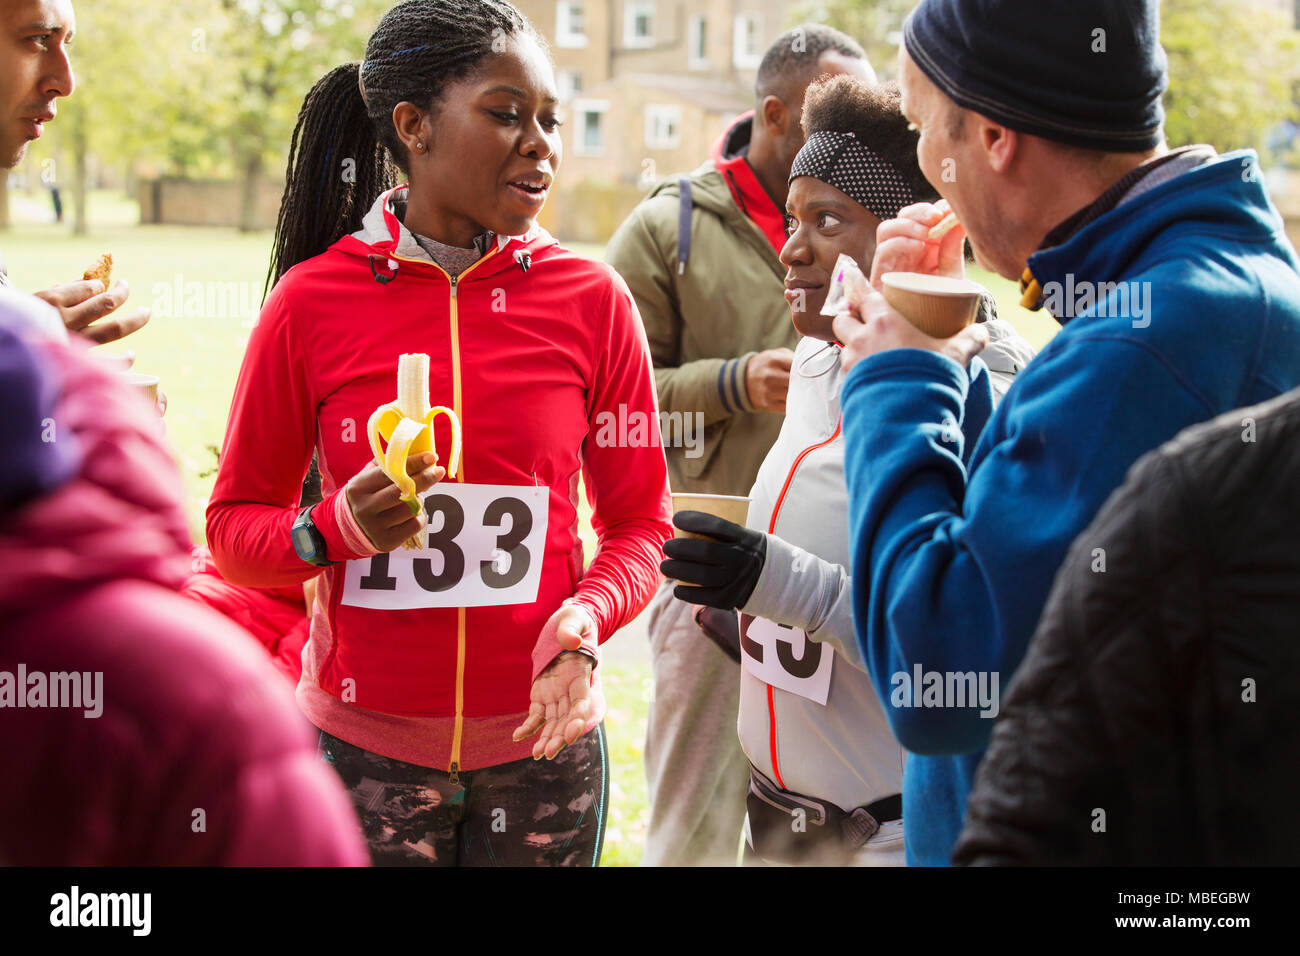 Runners drinking water and eating banana at charity race in park Stock Photo